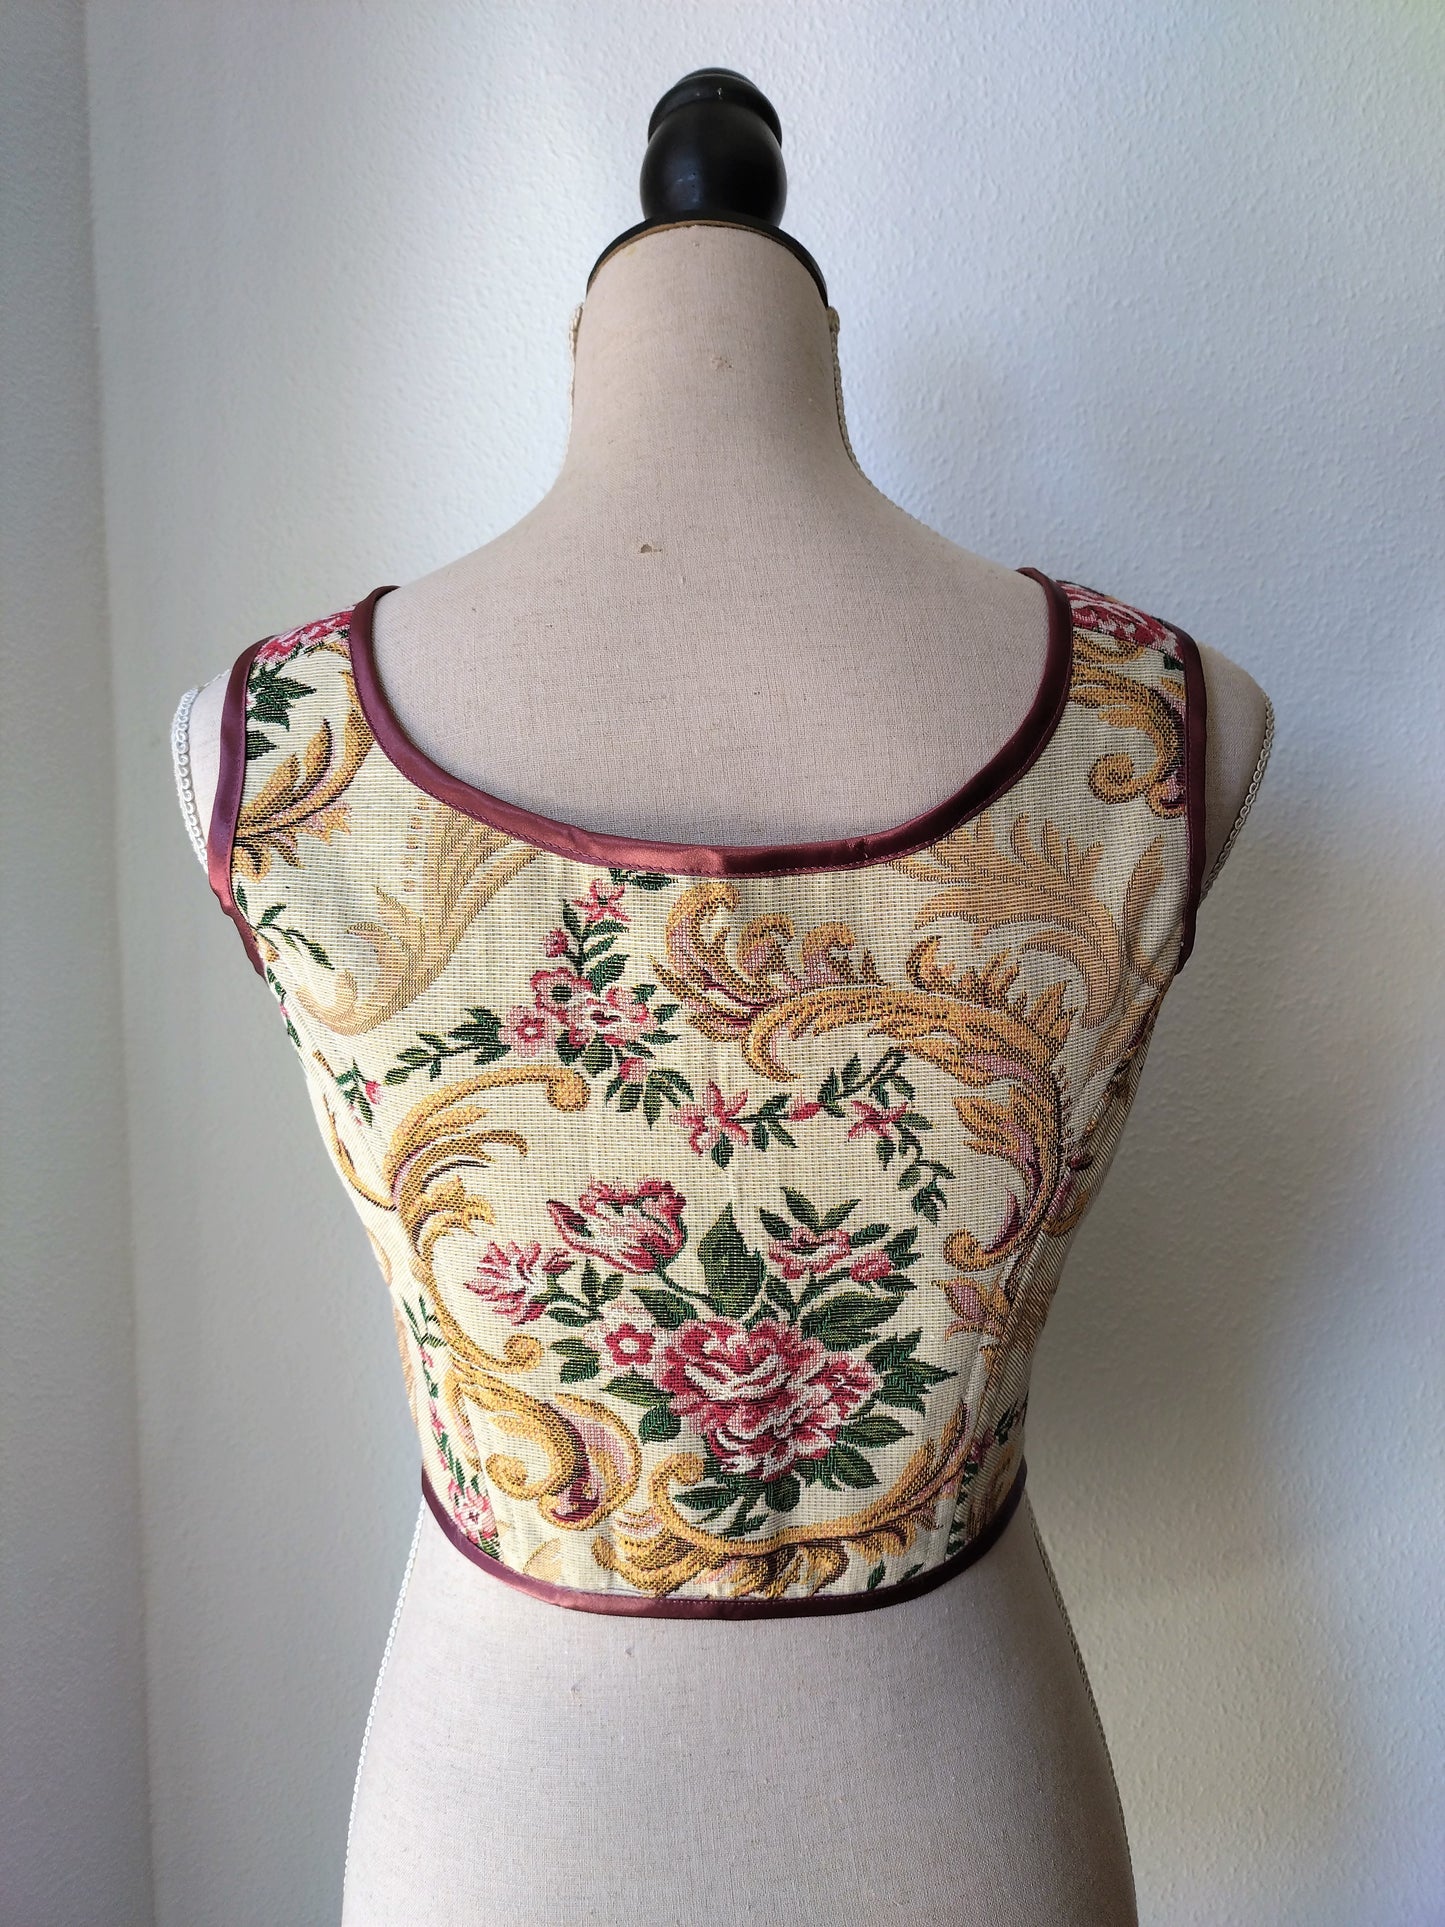 Tapestry corset stays